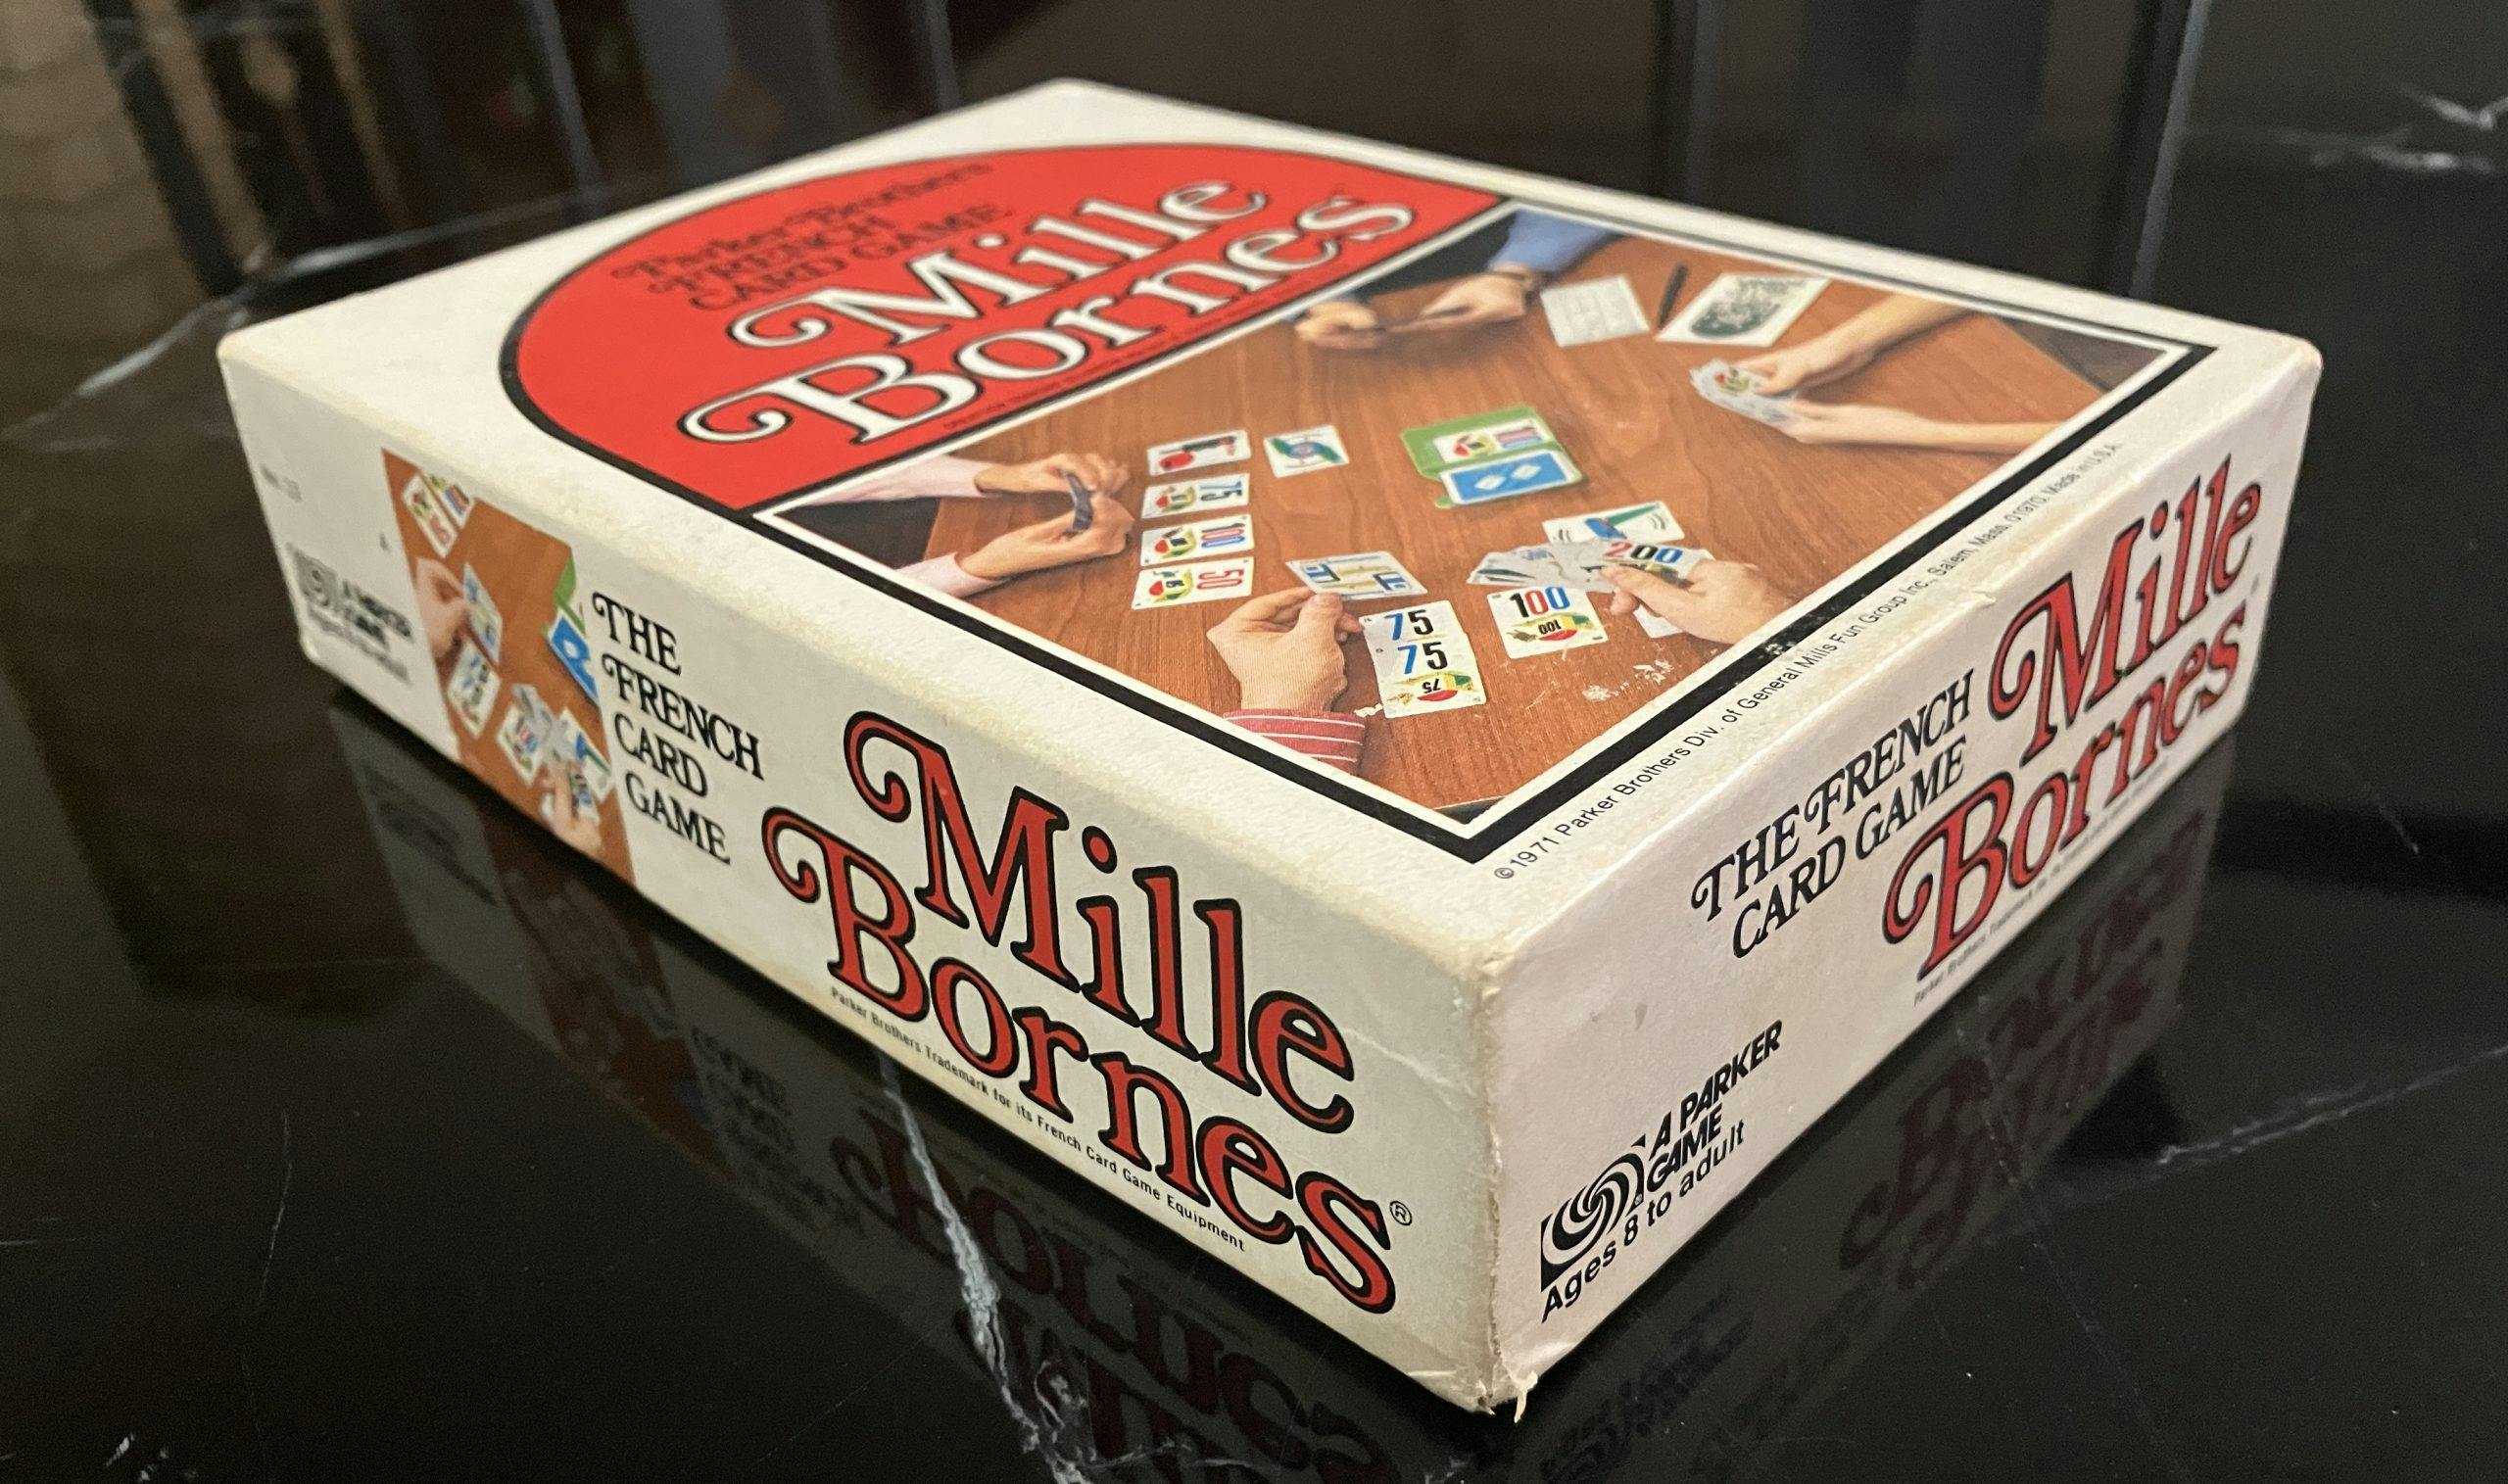 80s Mille Bornes cards  Cards, Card games, Deck